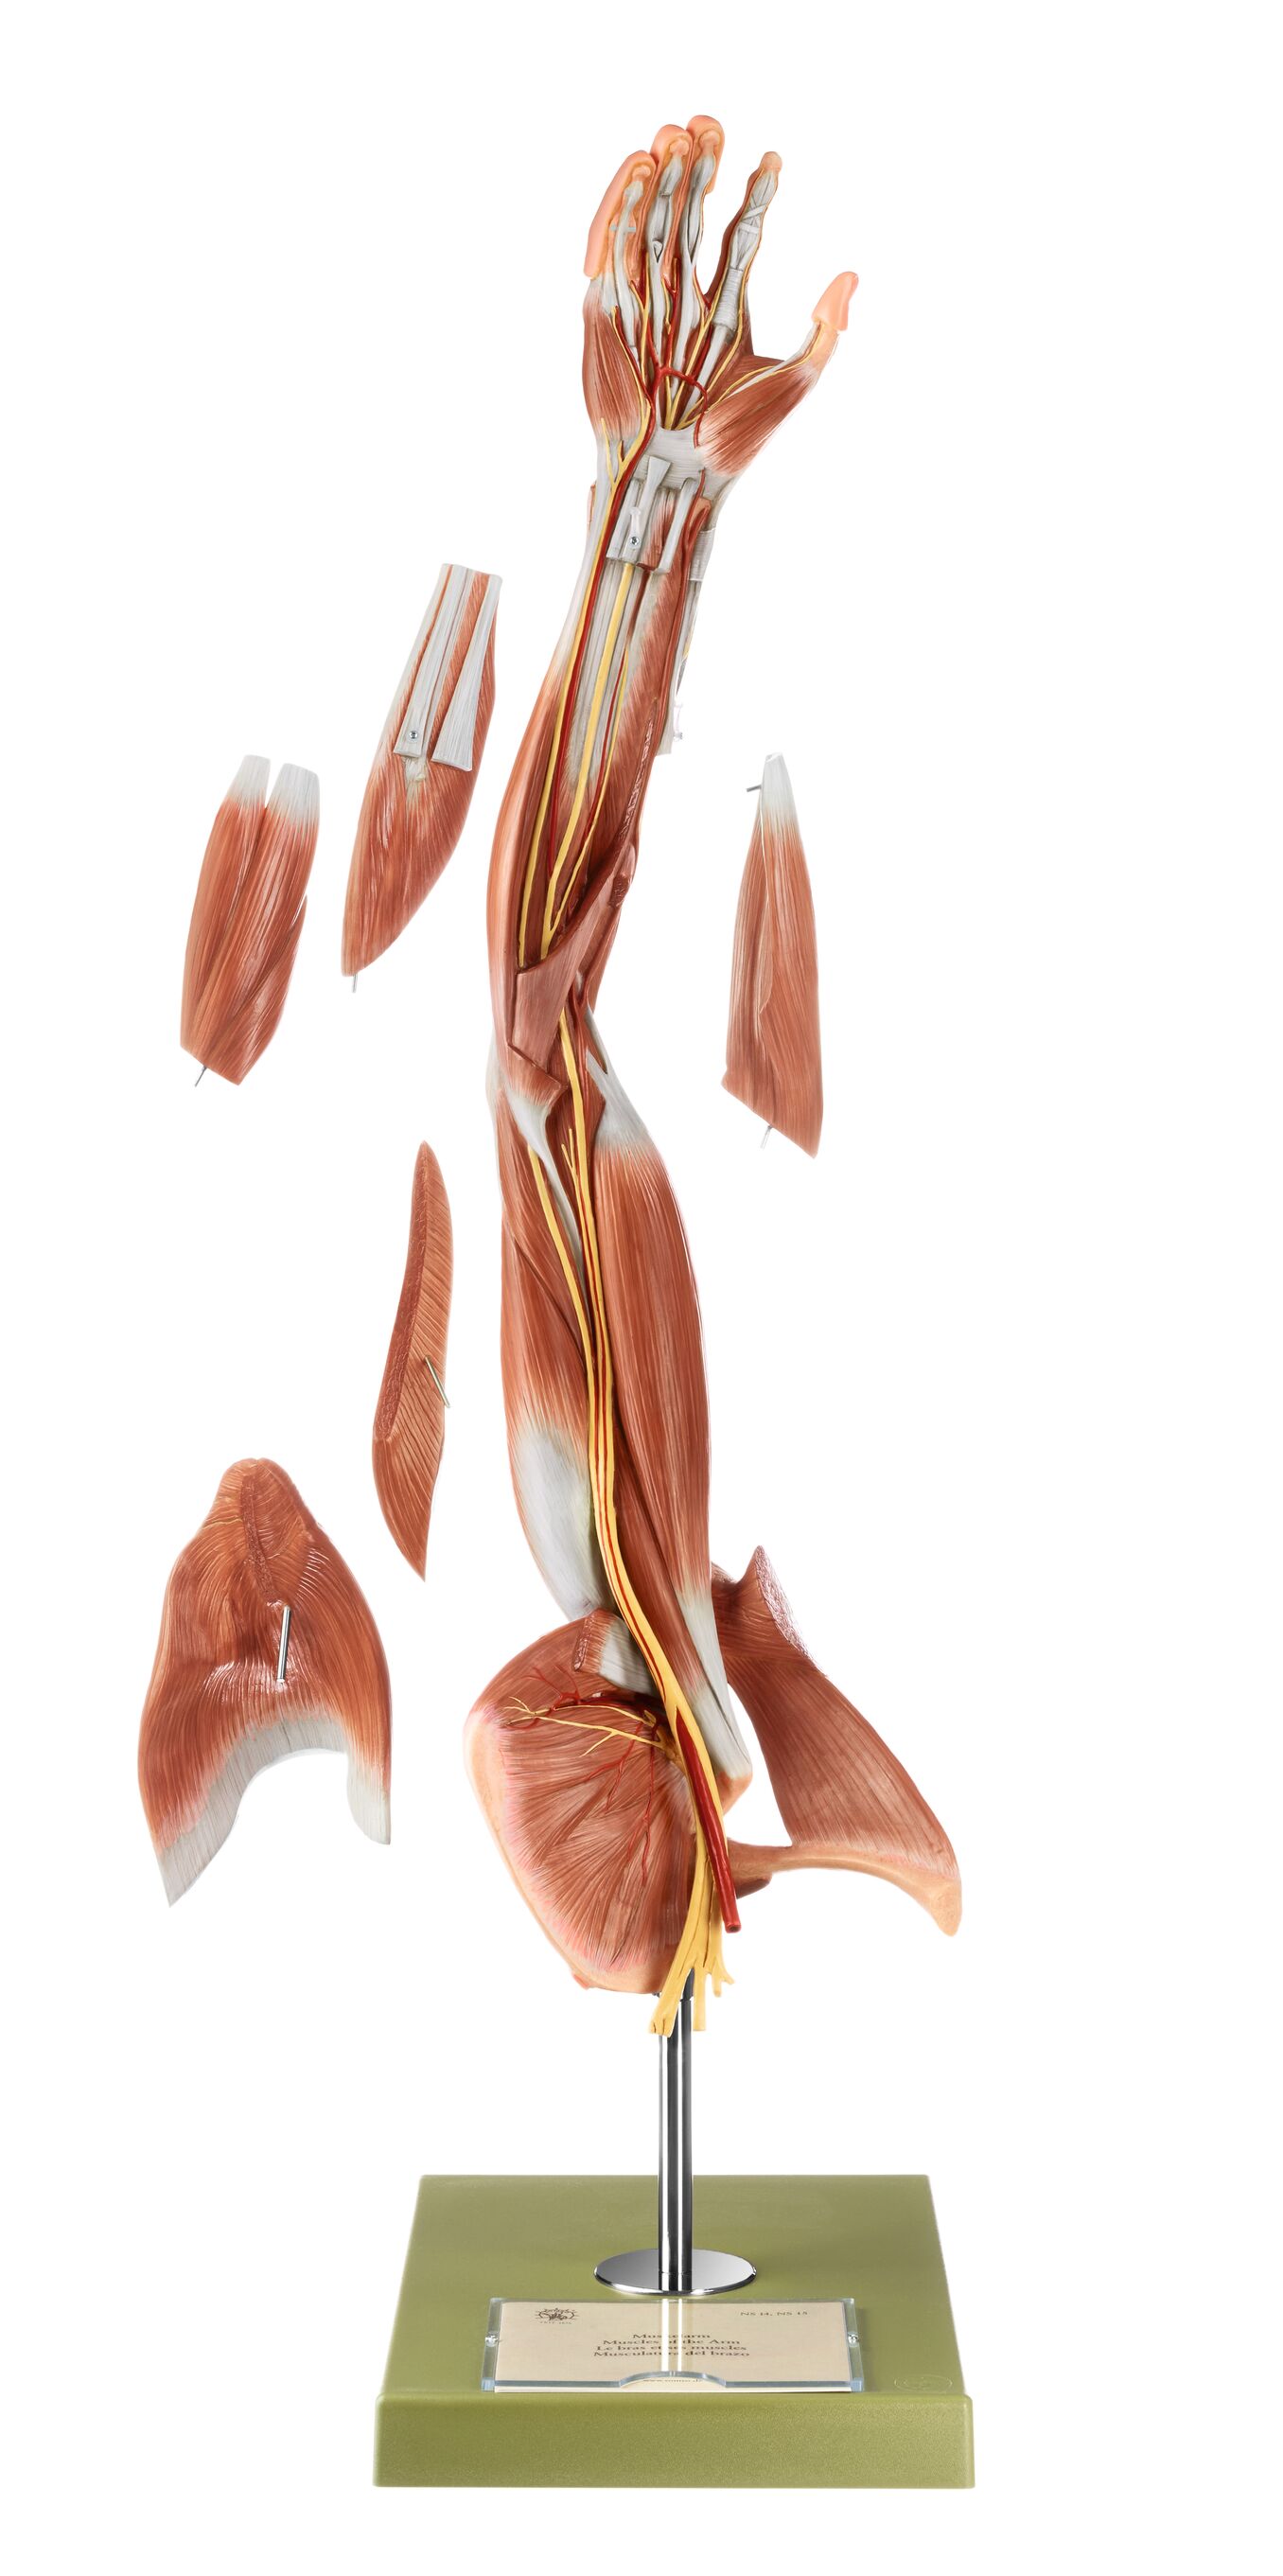 SOMSO Muscles of the Arm with Shoulder Girdle